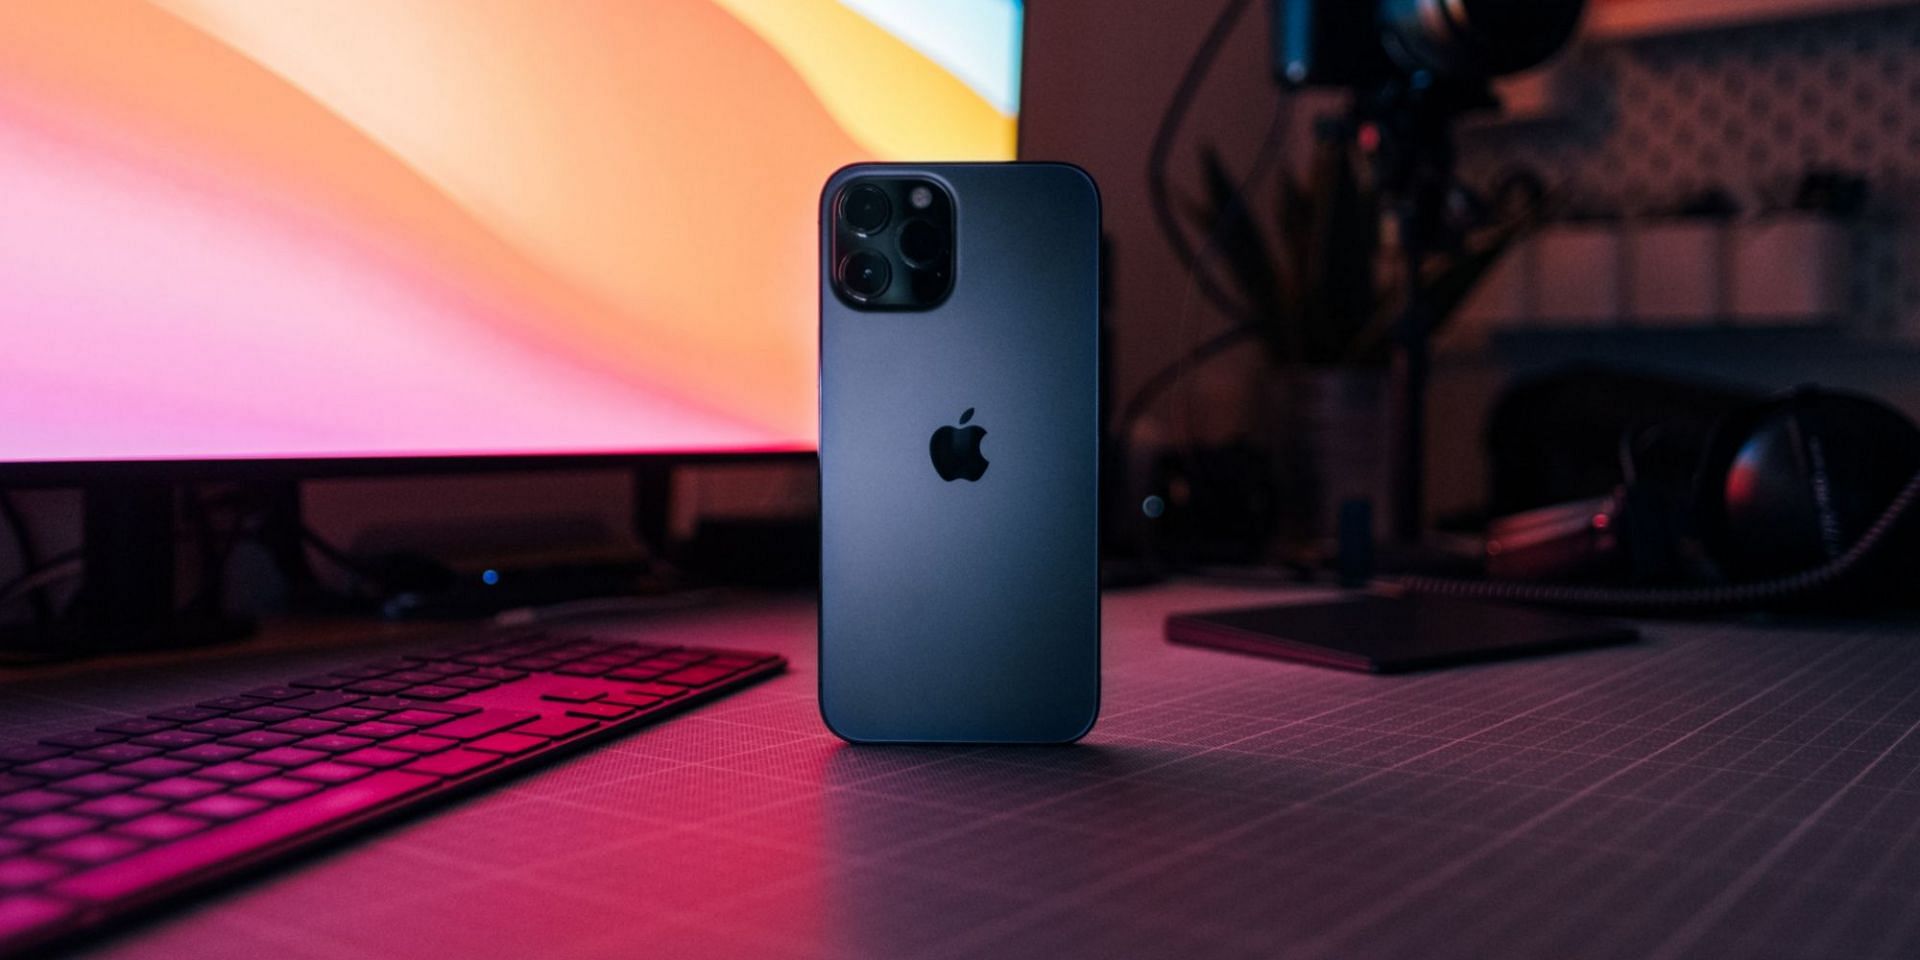 Exploring whether or not the iPhone 12 Pro is value for money in Feb 2023 (Image via Unsplash)